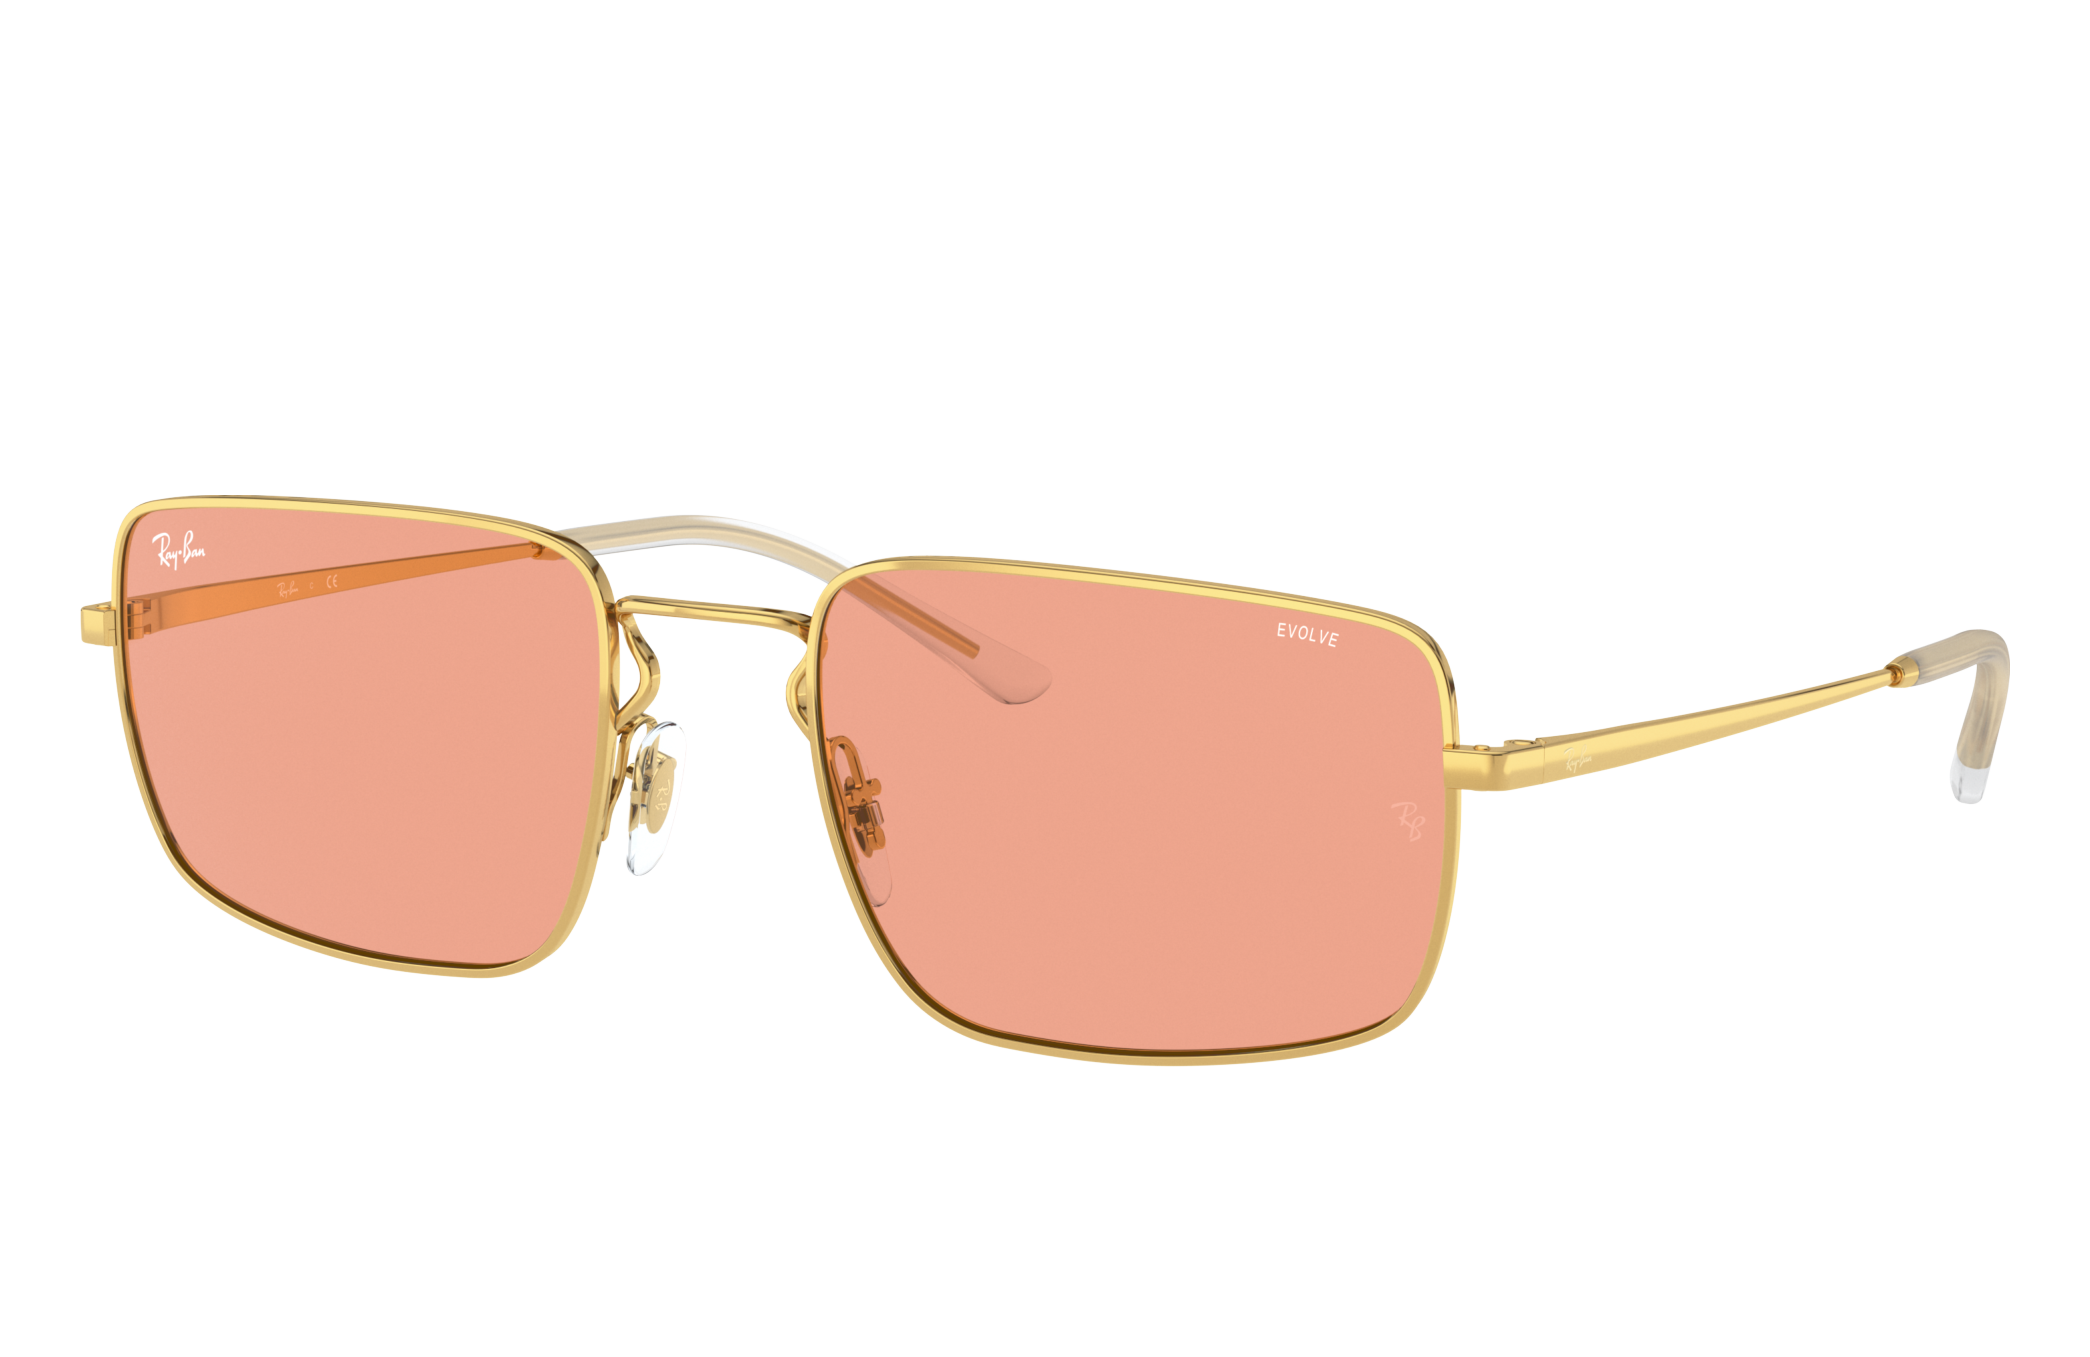 Rb3669 Sunglasses in Gold and Red Photochromic | Ray-Ban®